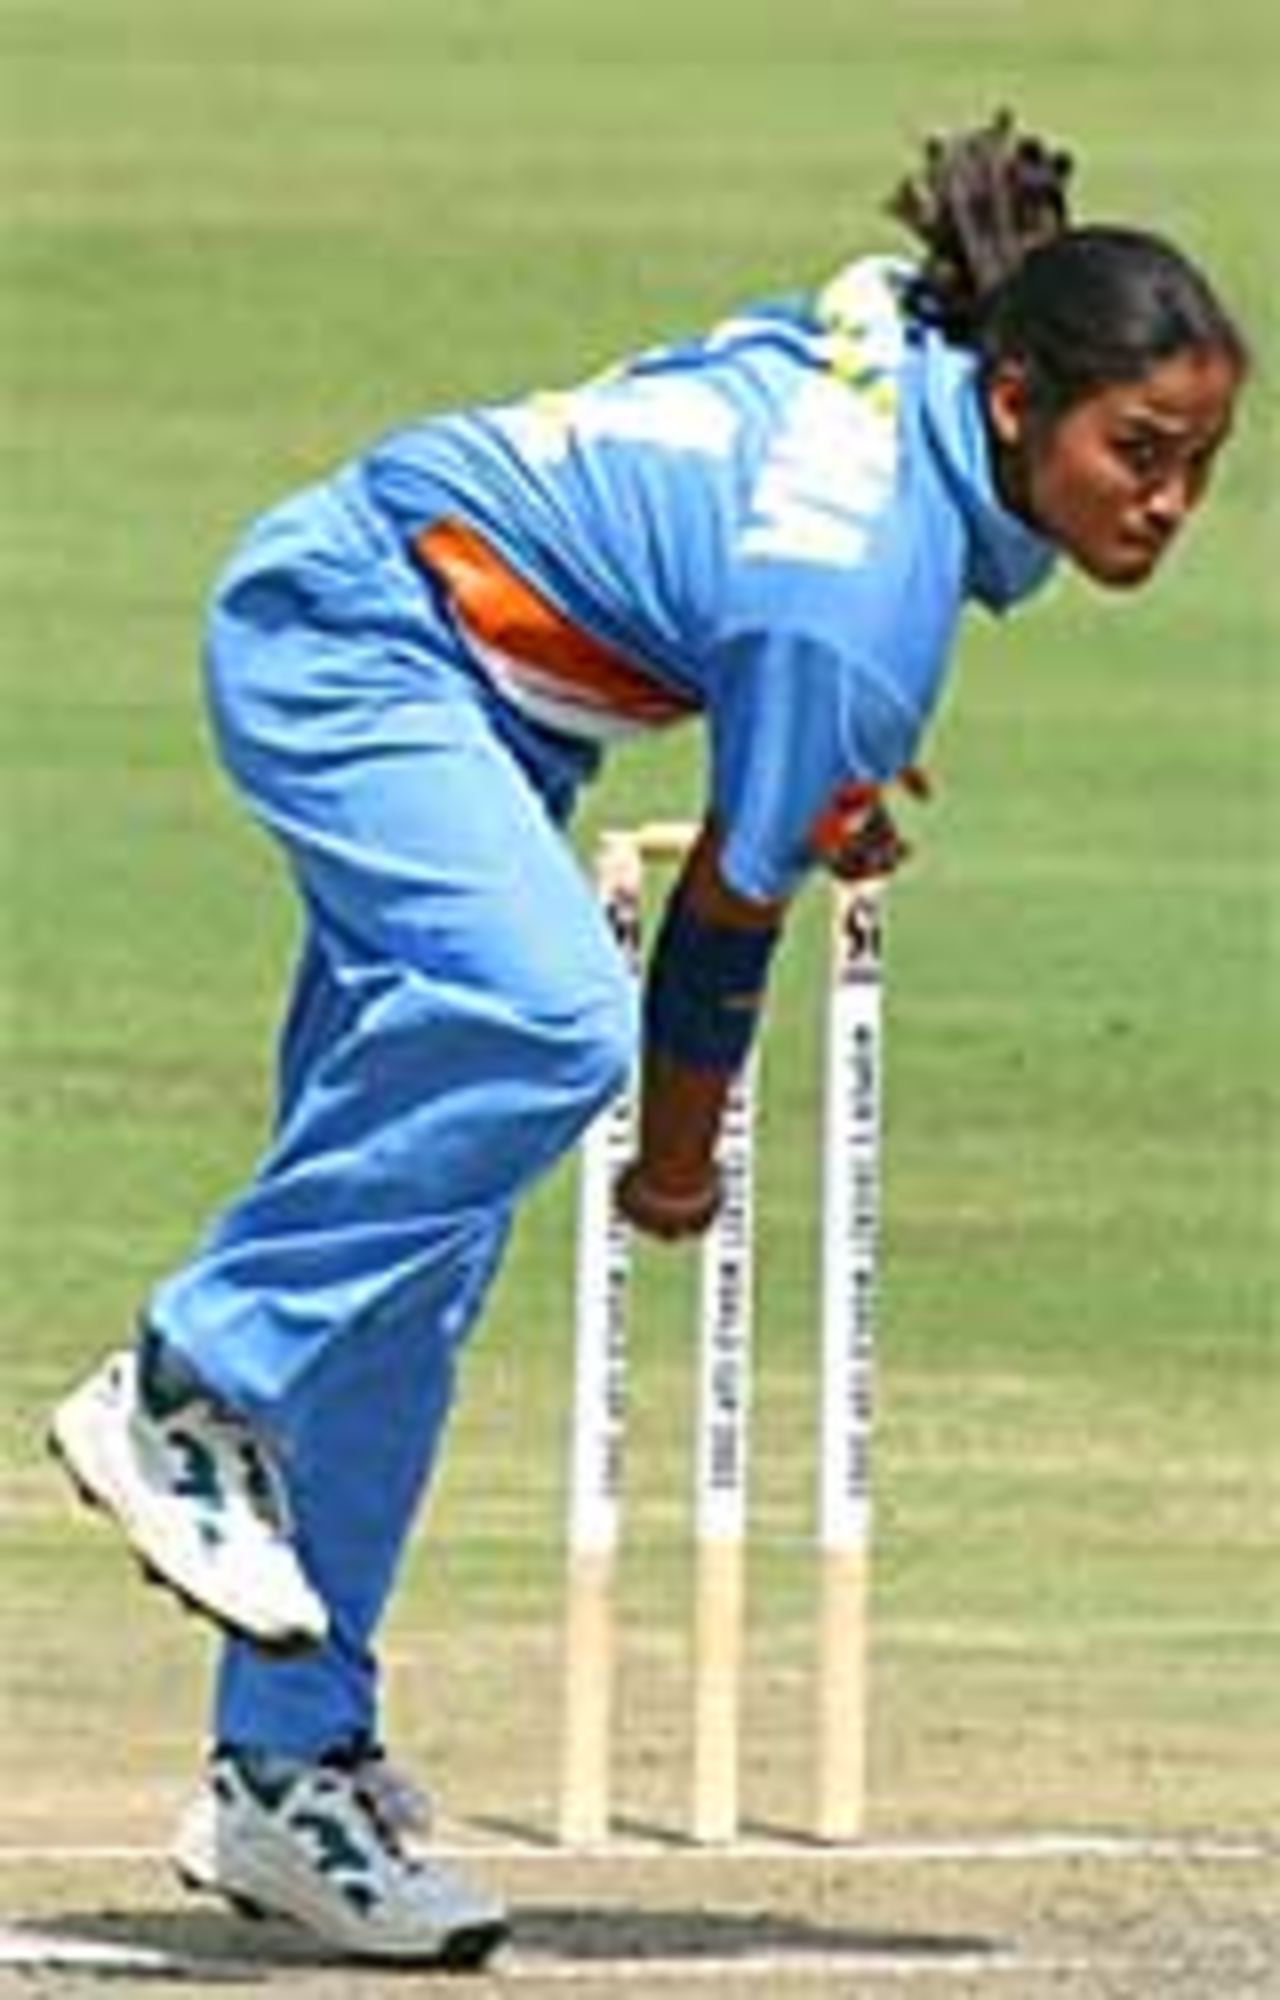 Amita Sharma in action, South Africa v India, World Cup, March 26, 2005